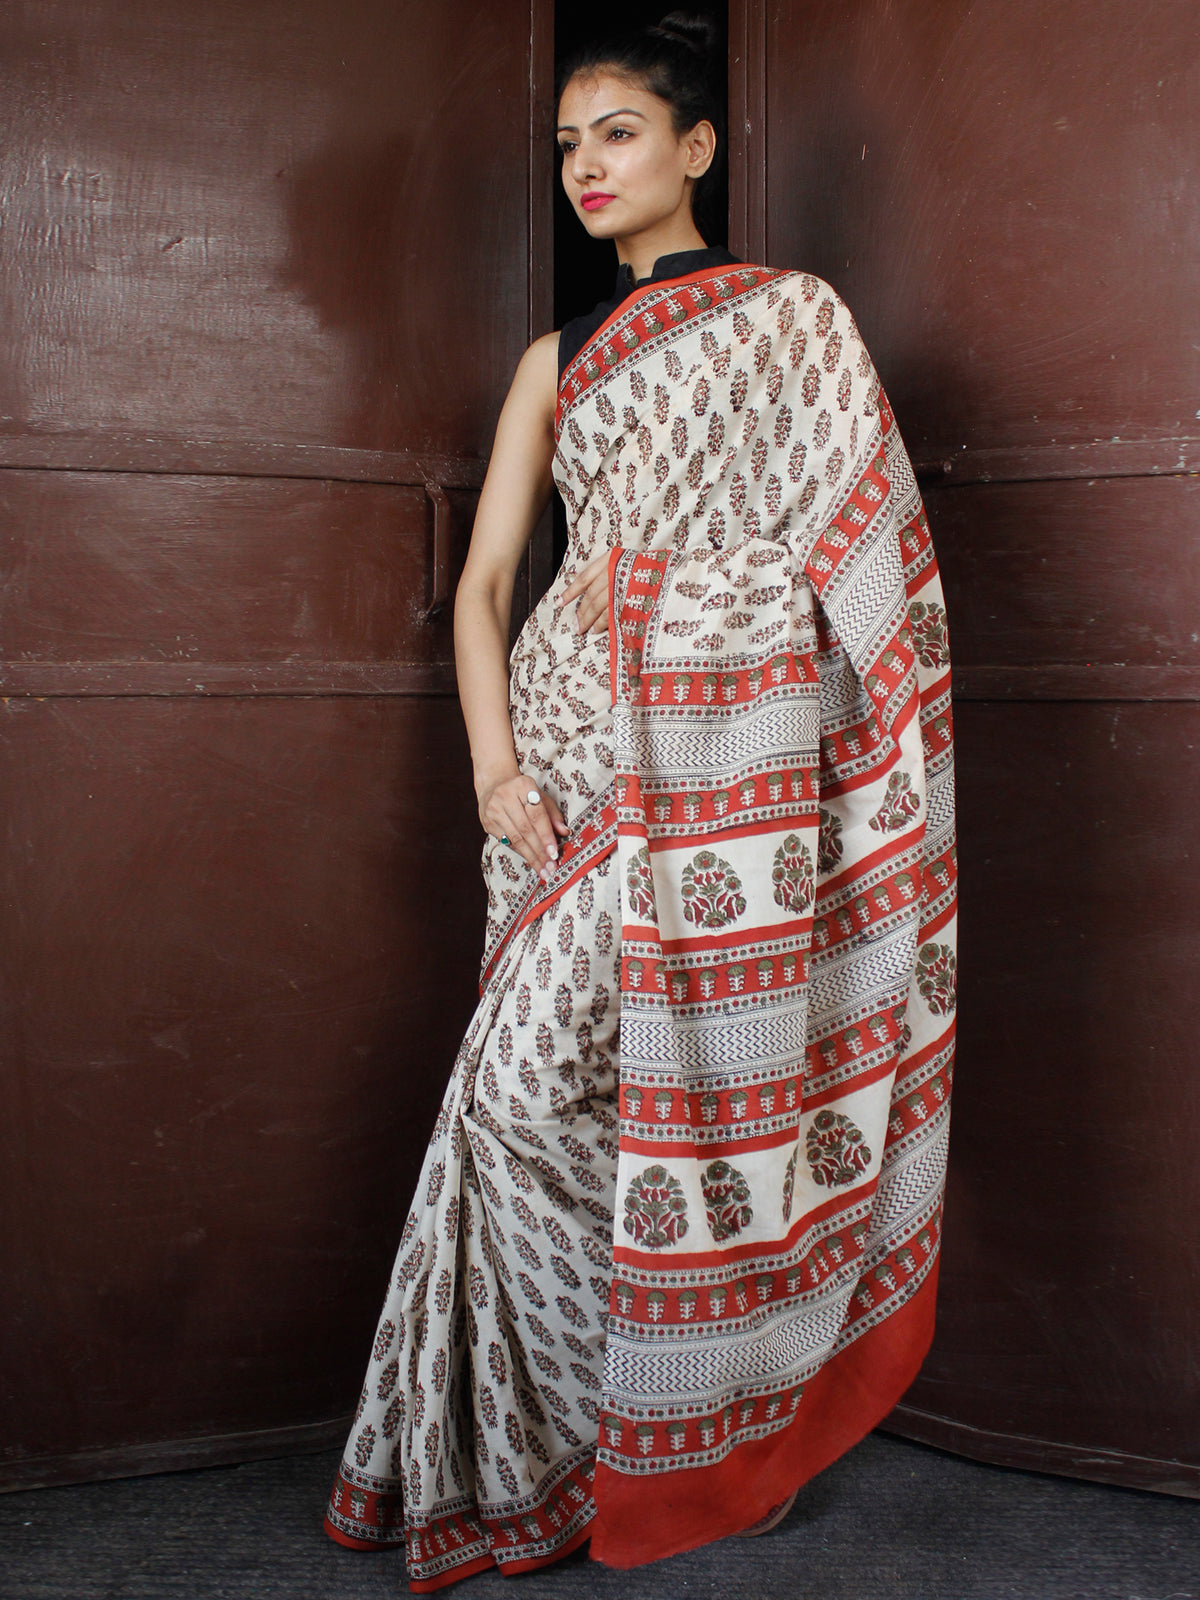 Beige Maroon Green Black Hand Block Printed in Natural Colors Cotton Mul Saree - S031703678